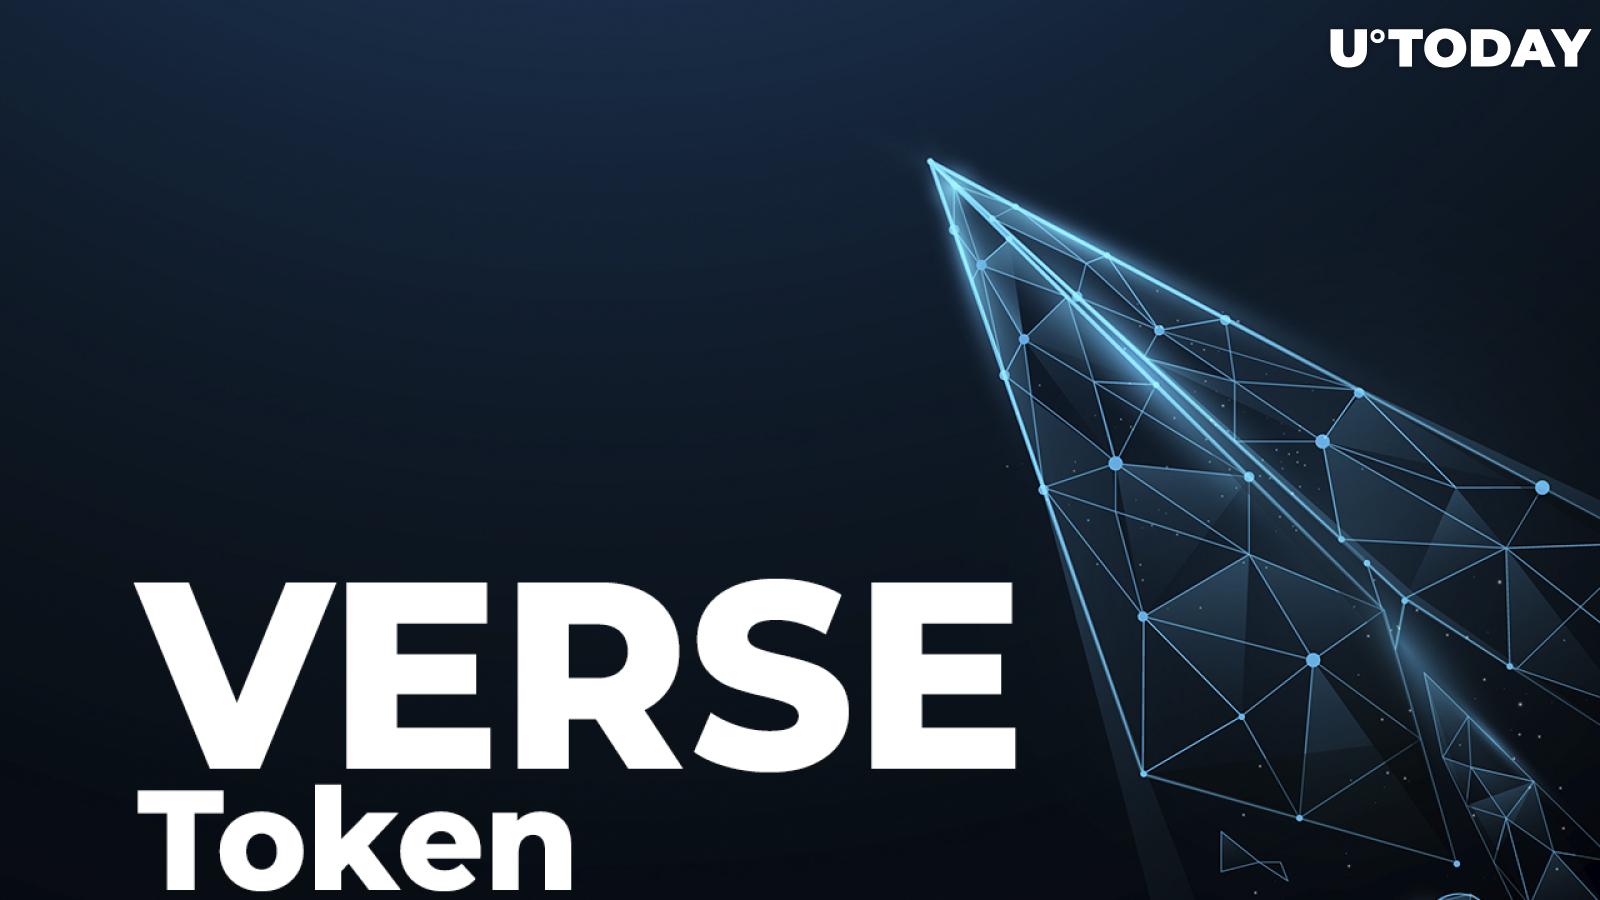 Roger Ver's Bitcoin.com to Launch ETH-Based VERSE Token: Details